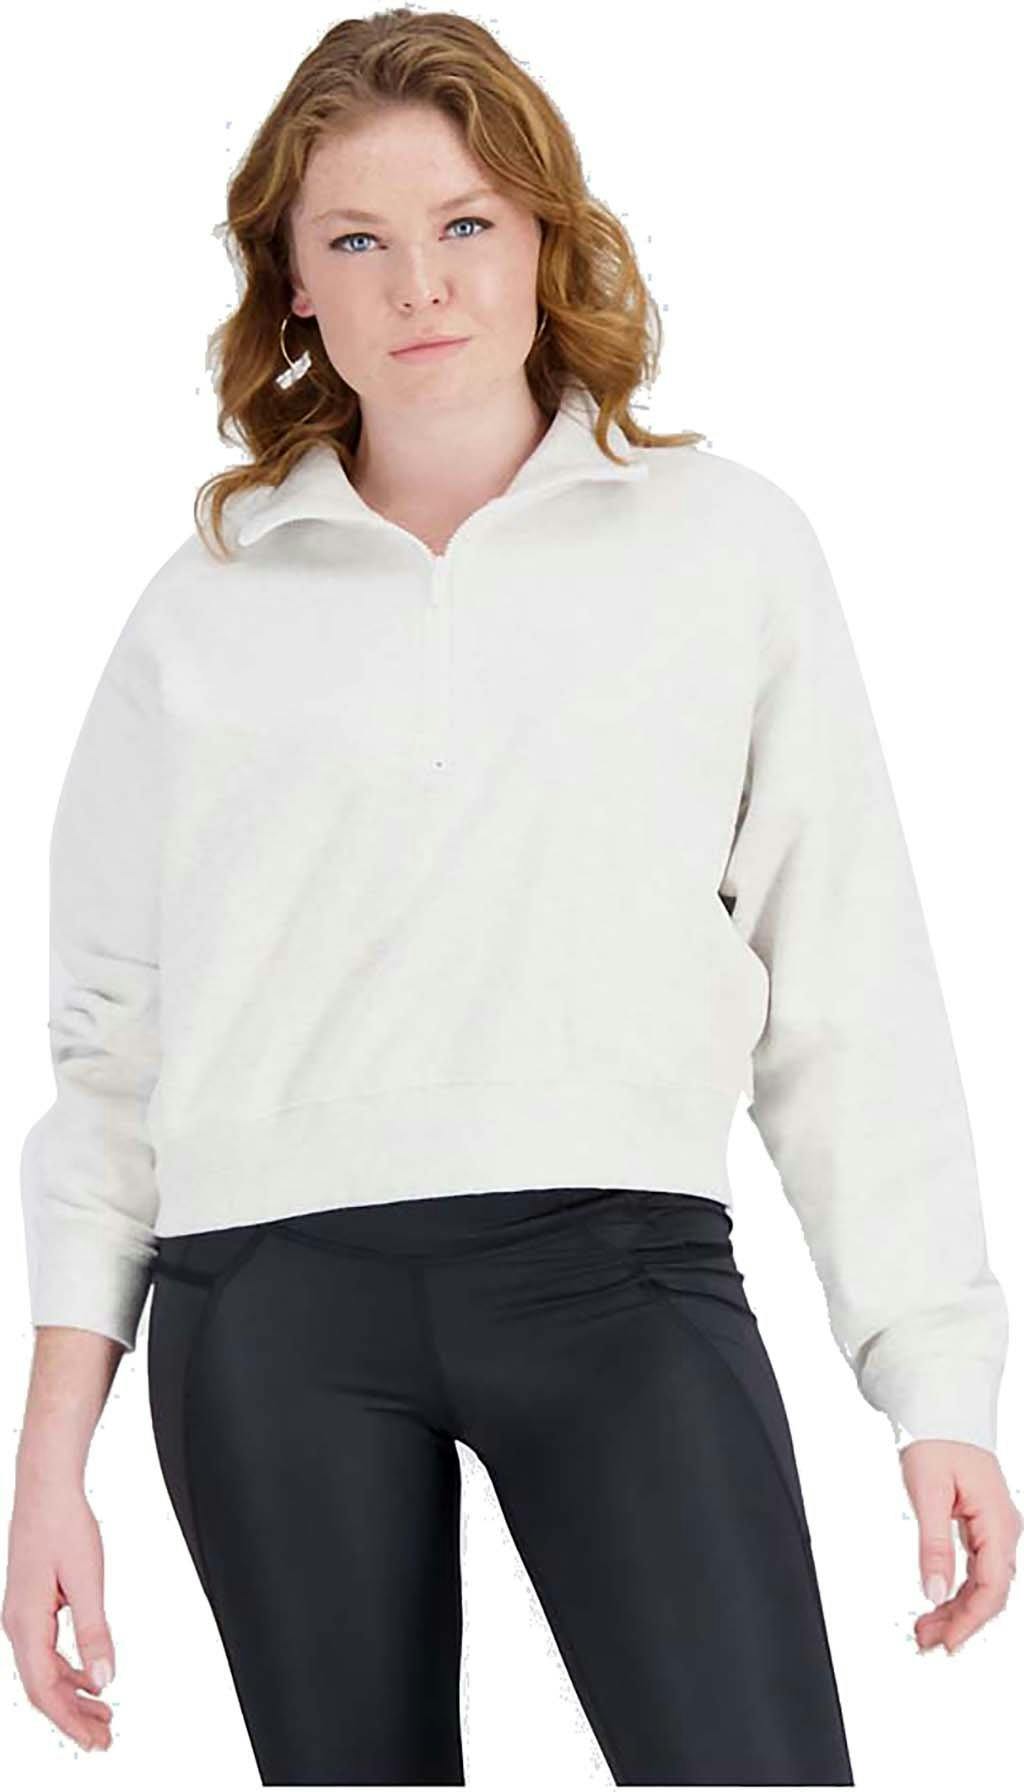 Product image for Athletics Remastered French Terry 1/4 Zip Top - Women's